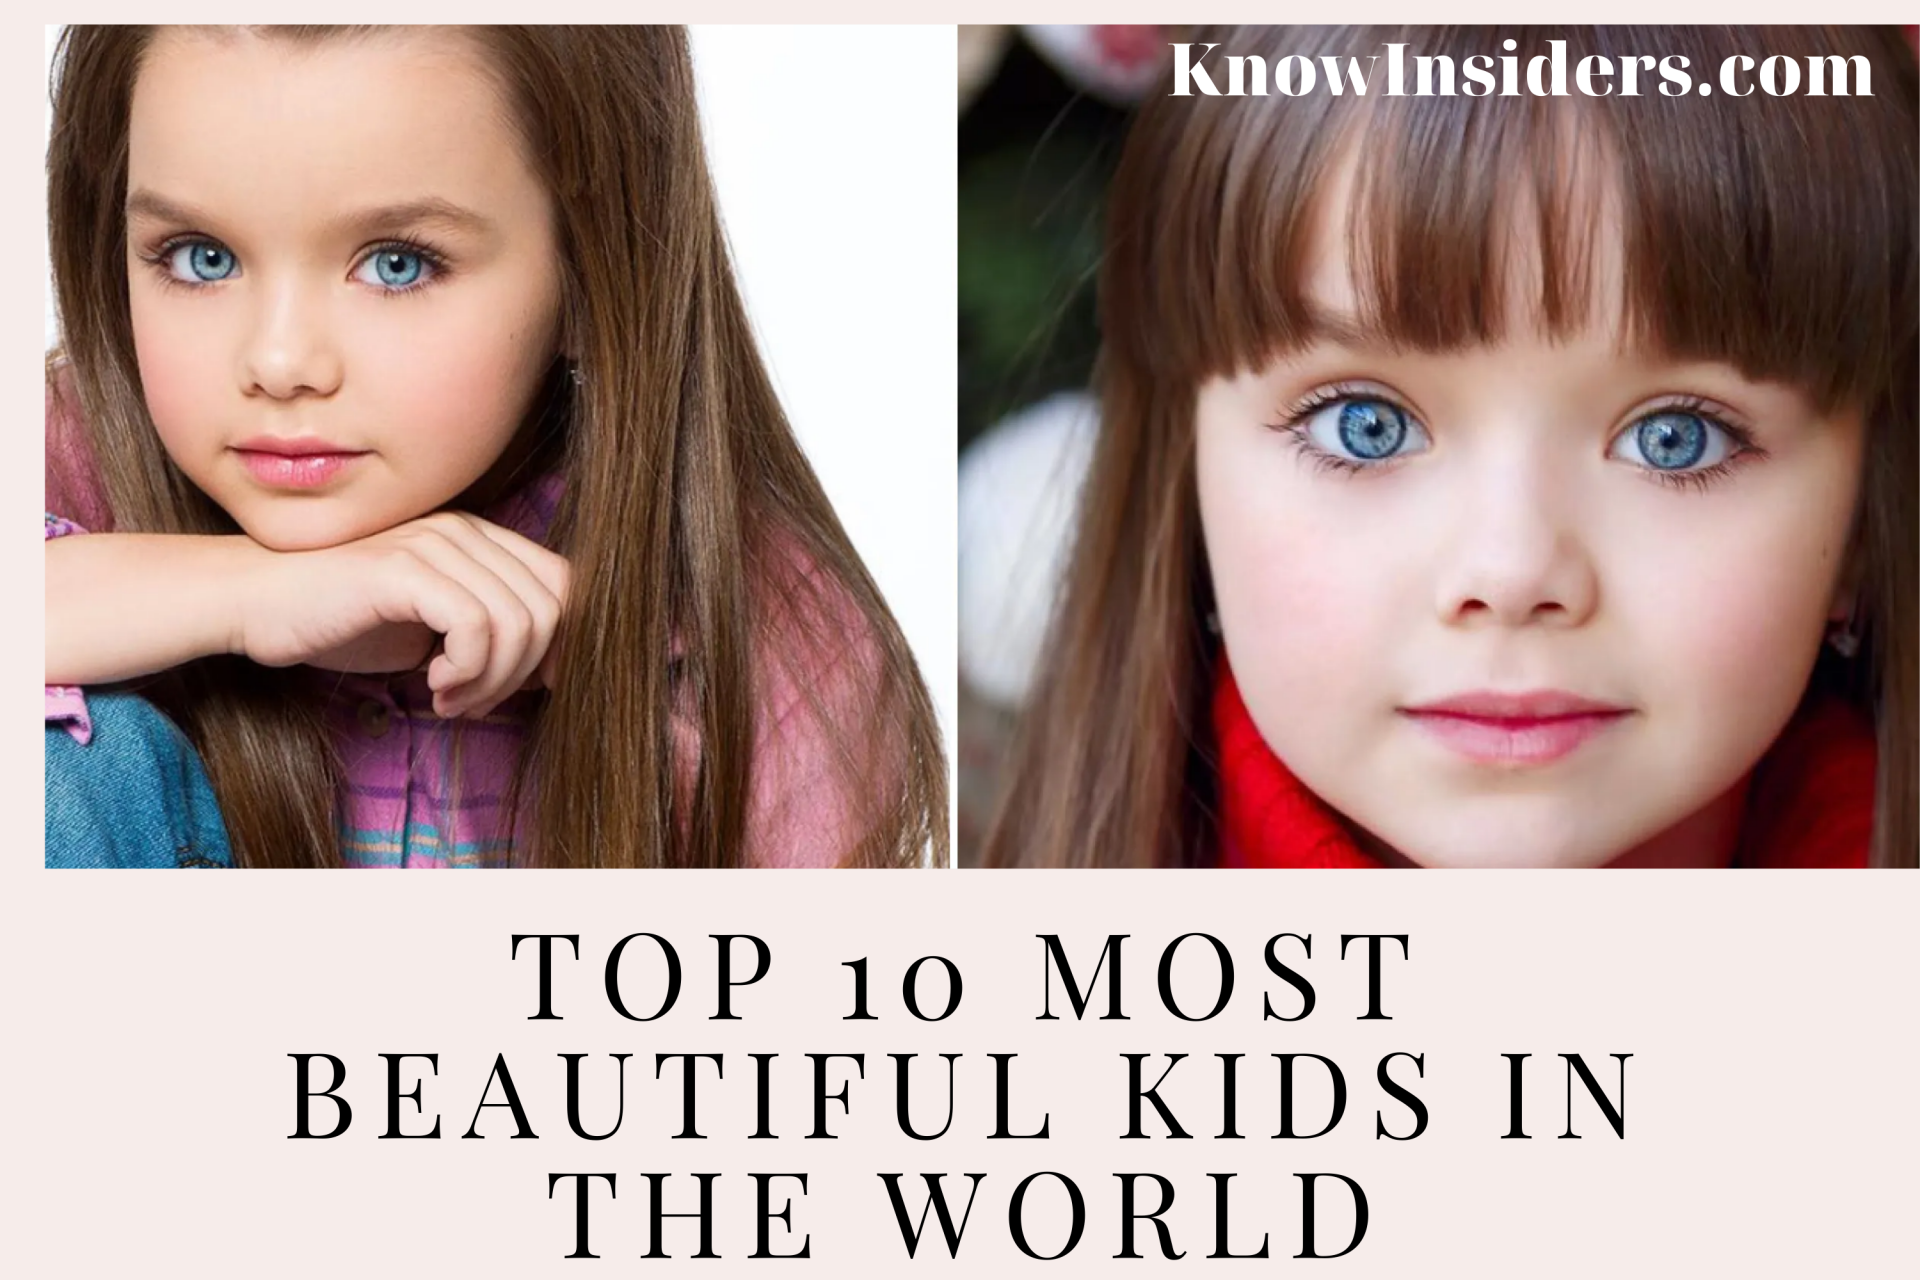 Top 10 Most Beautiful Kids in the World Today